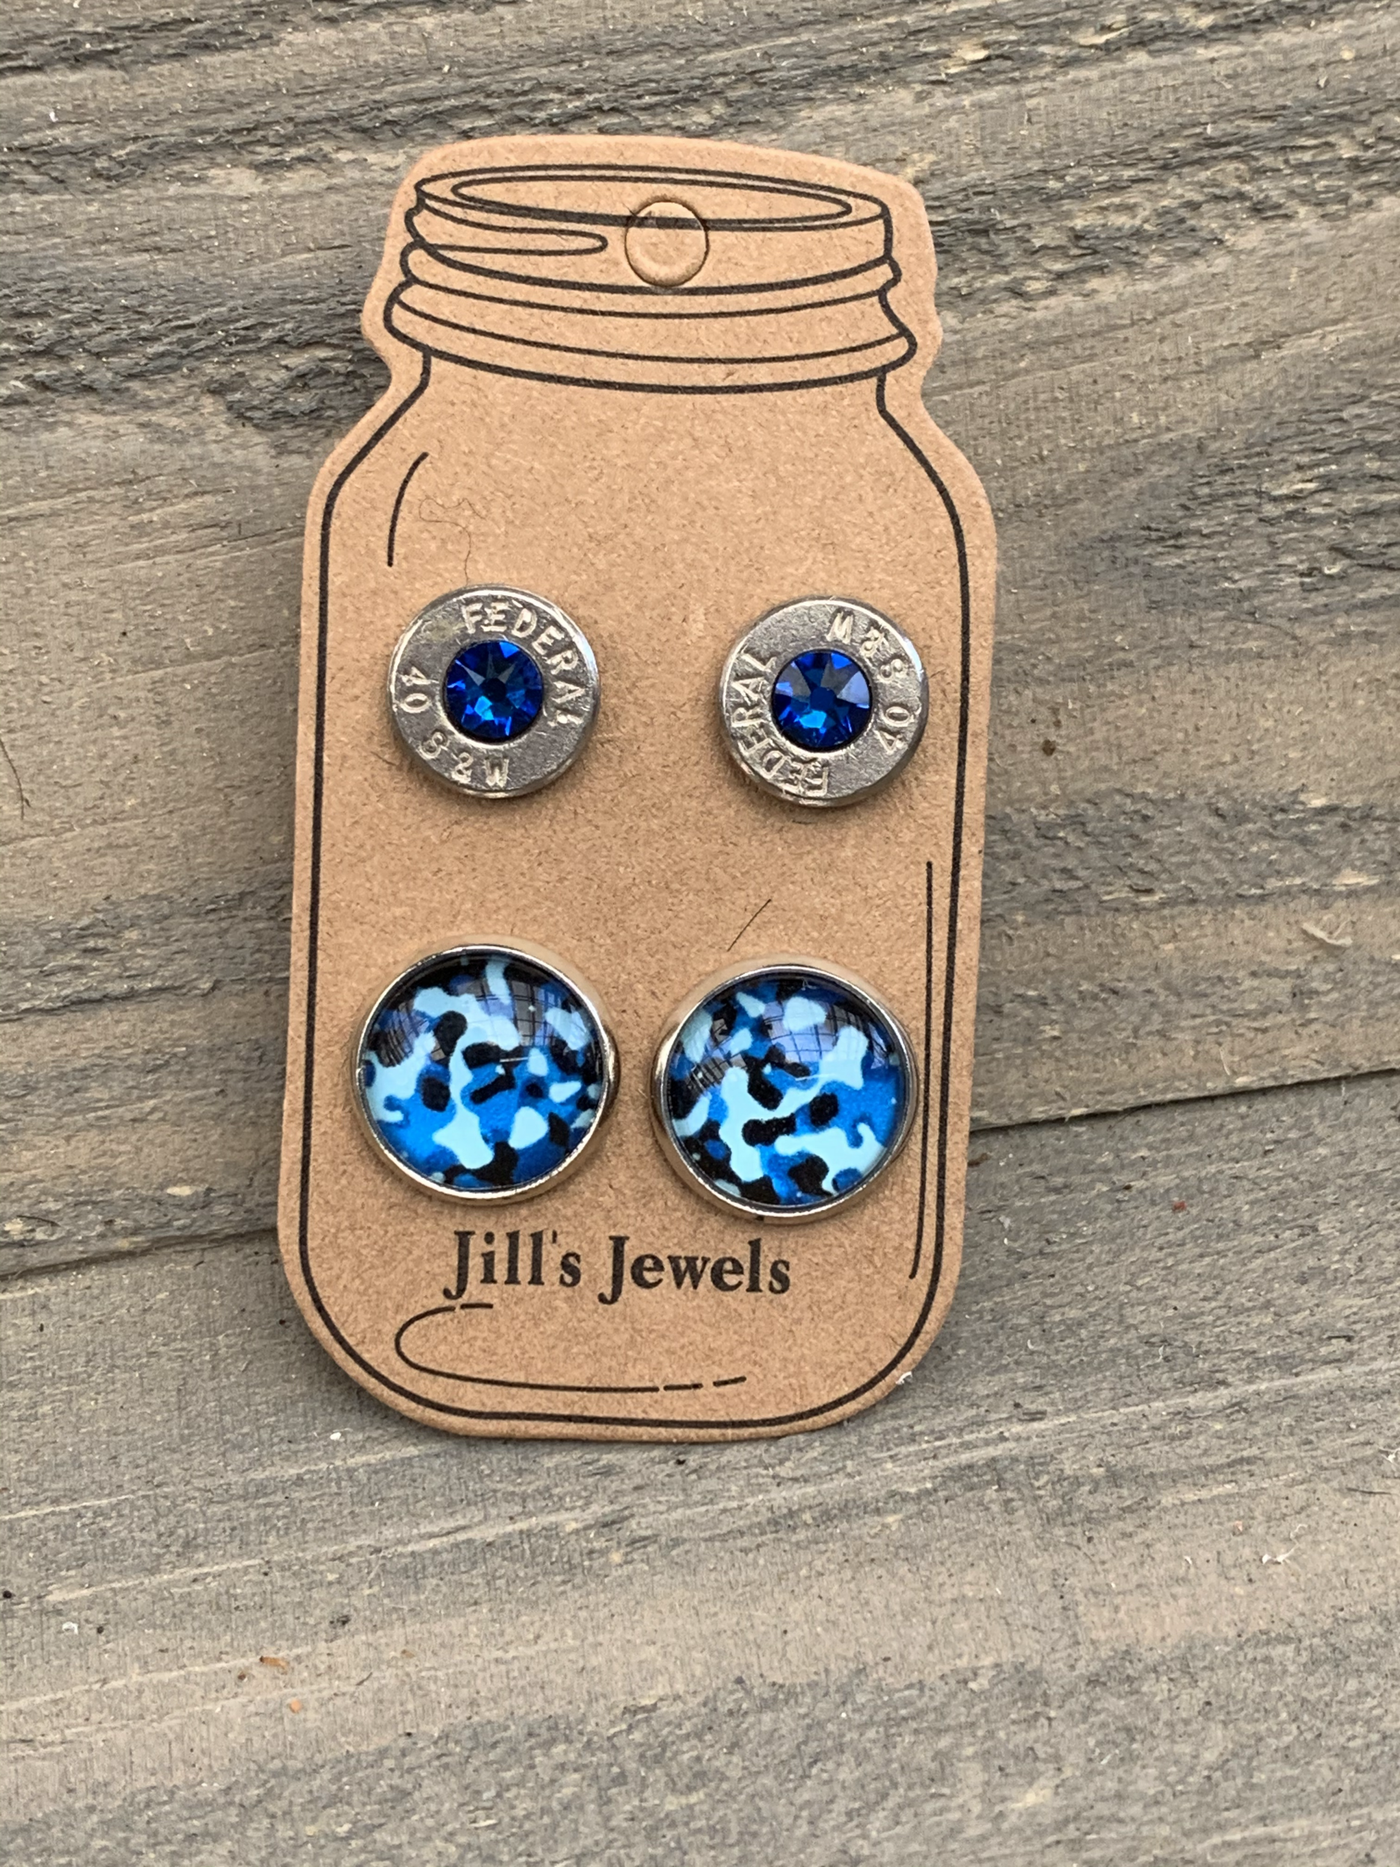 Blue Camo 40 Caliber bullet earring set - Jill's Jewels | Unique, Handcrafted, Trendy, And Fun Jewelry